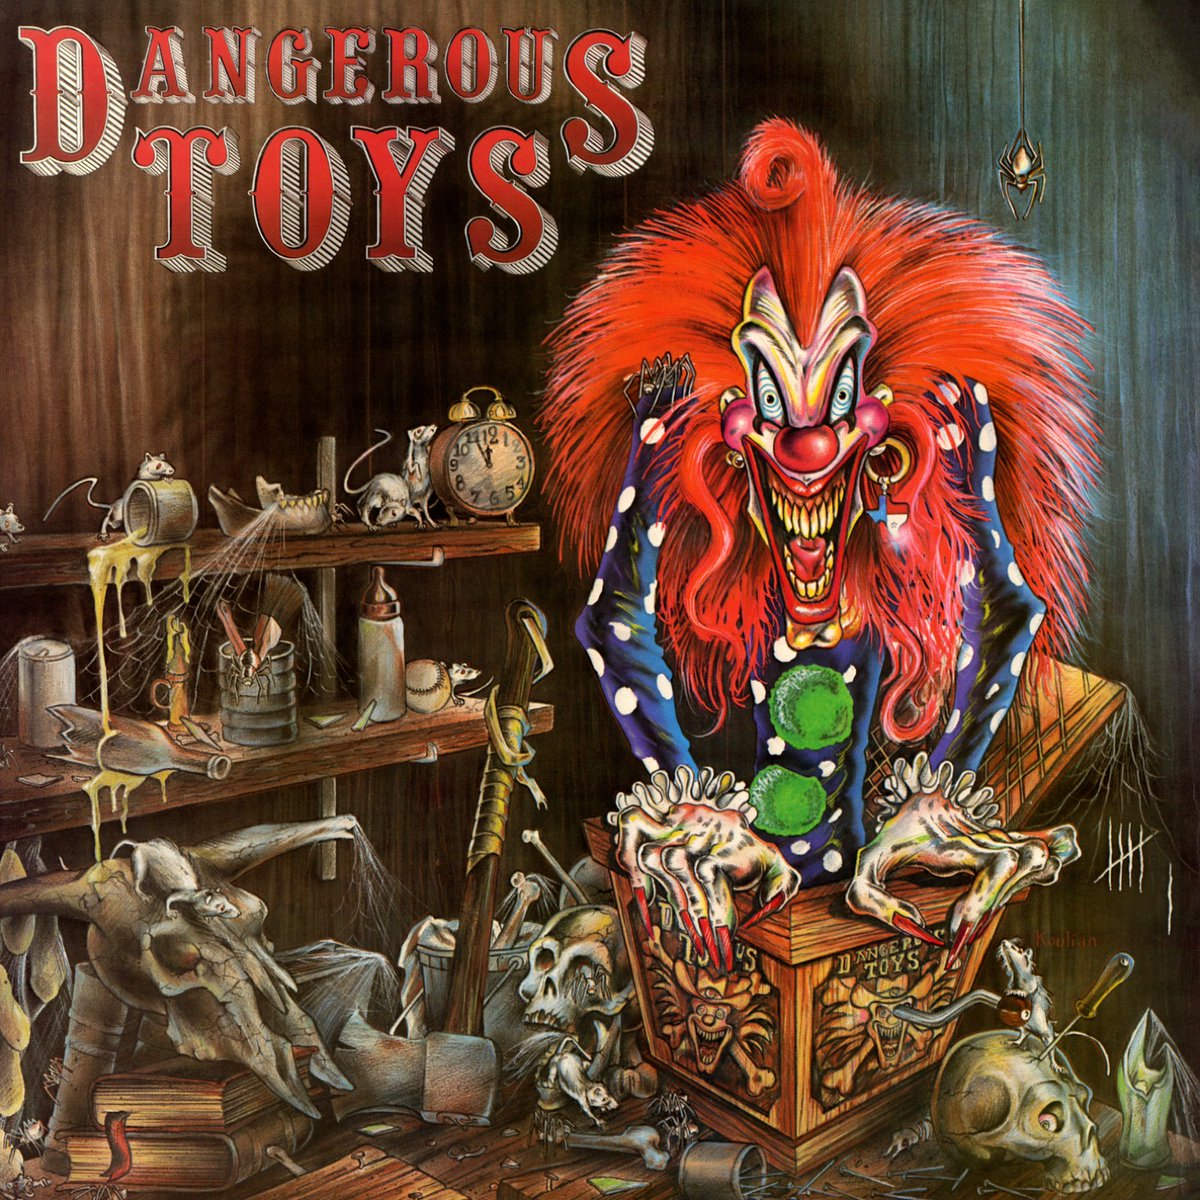 @RichEmbury's POWER HOUR #Live
5pm Pacific / 8pm Eastern / 2am Central Europe
#ClassicRock #Metal #MusicHistory #WaybackWednesday #HumpdayHeavy #70s #80s #90s

#NP: @dangeroustoys - Teas'n, Pleas'n
'Dangerous Toys' Released May 9th, 1989

🔊 #Listen (📻Stations)…